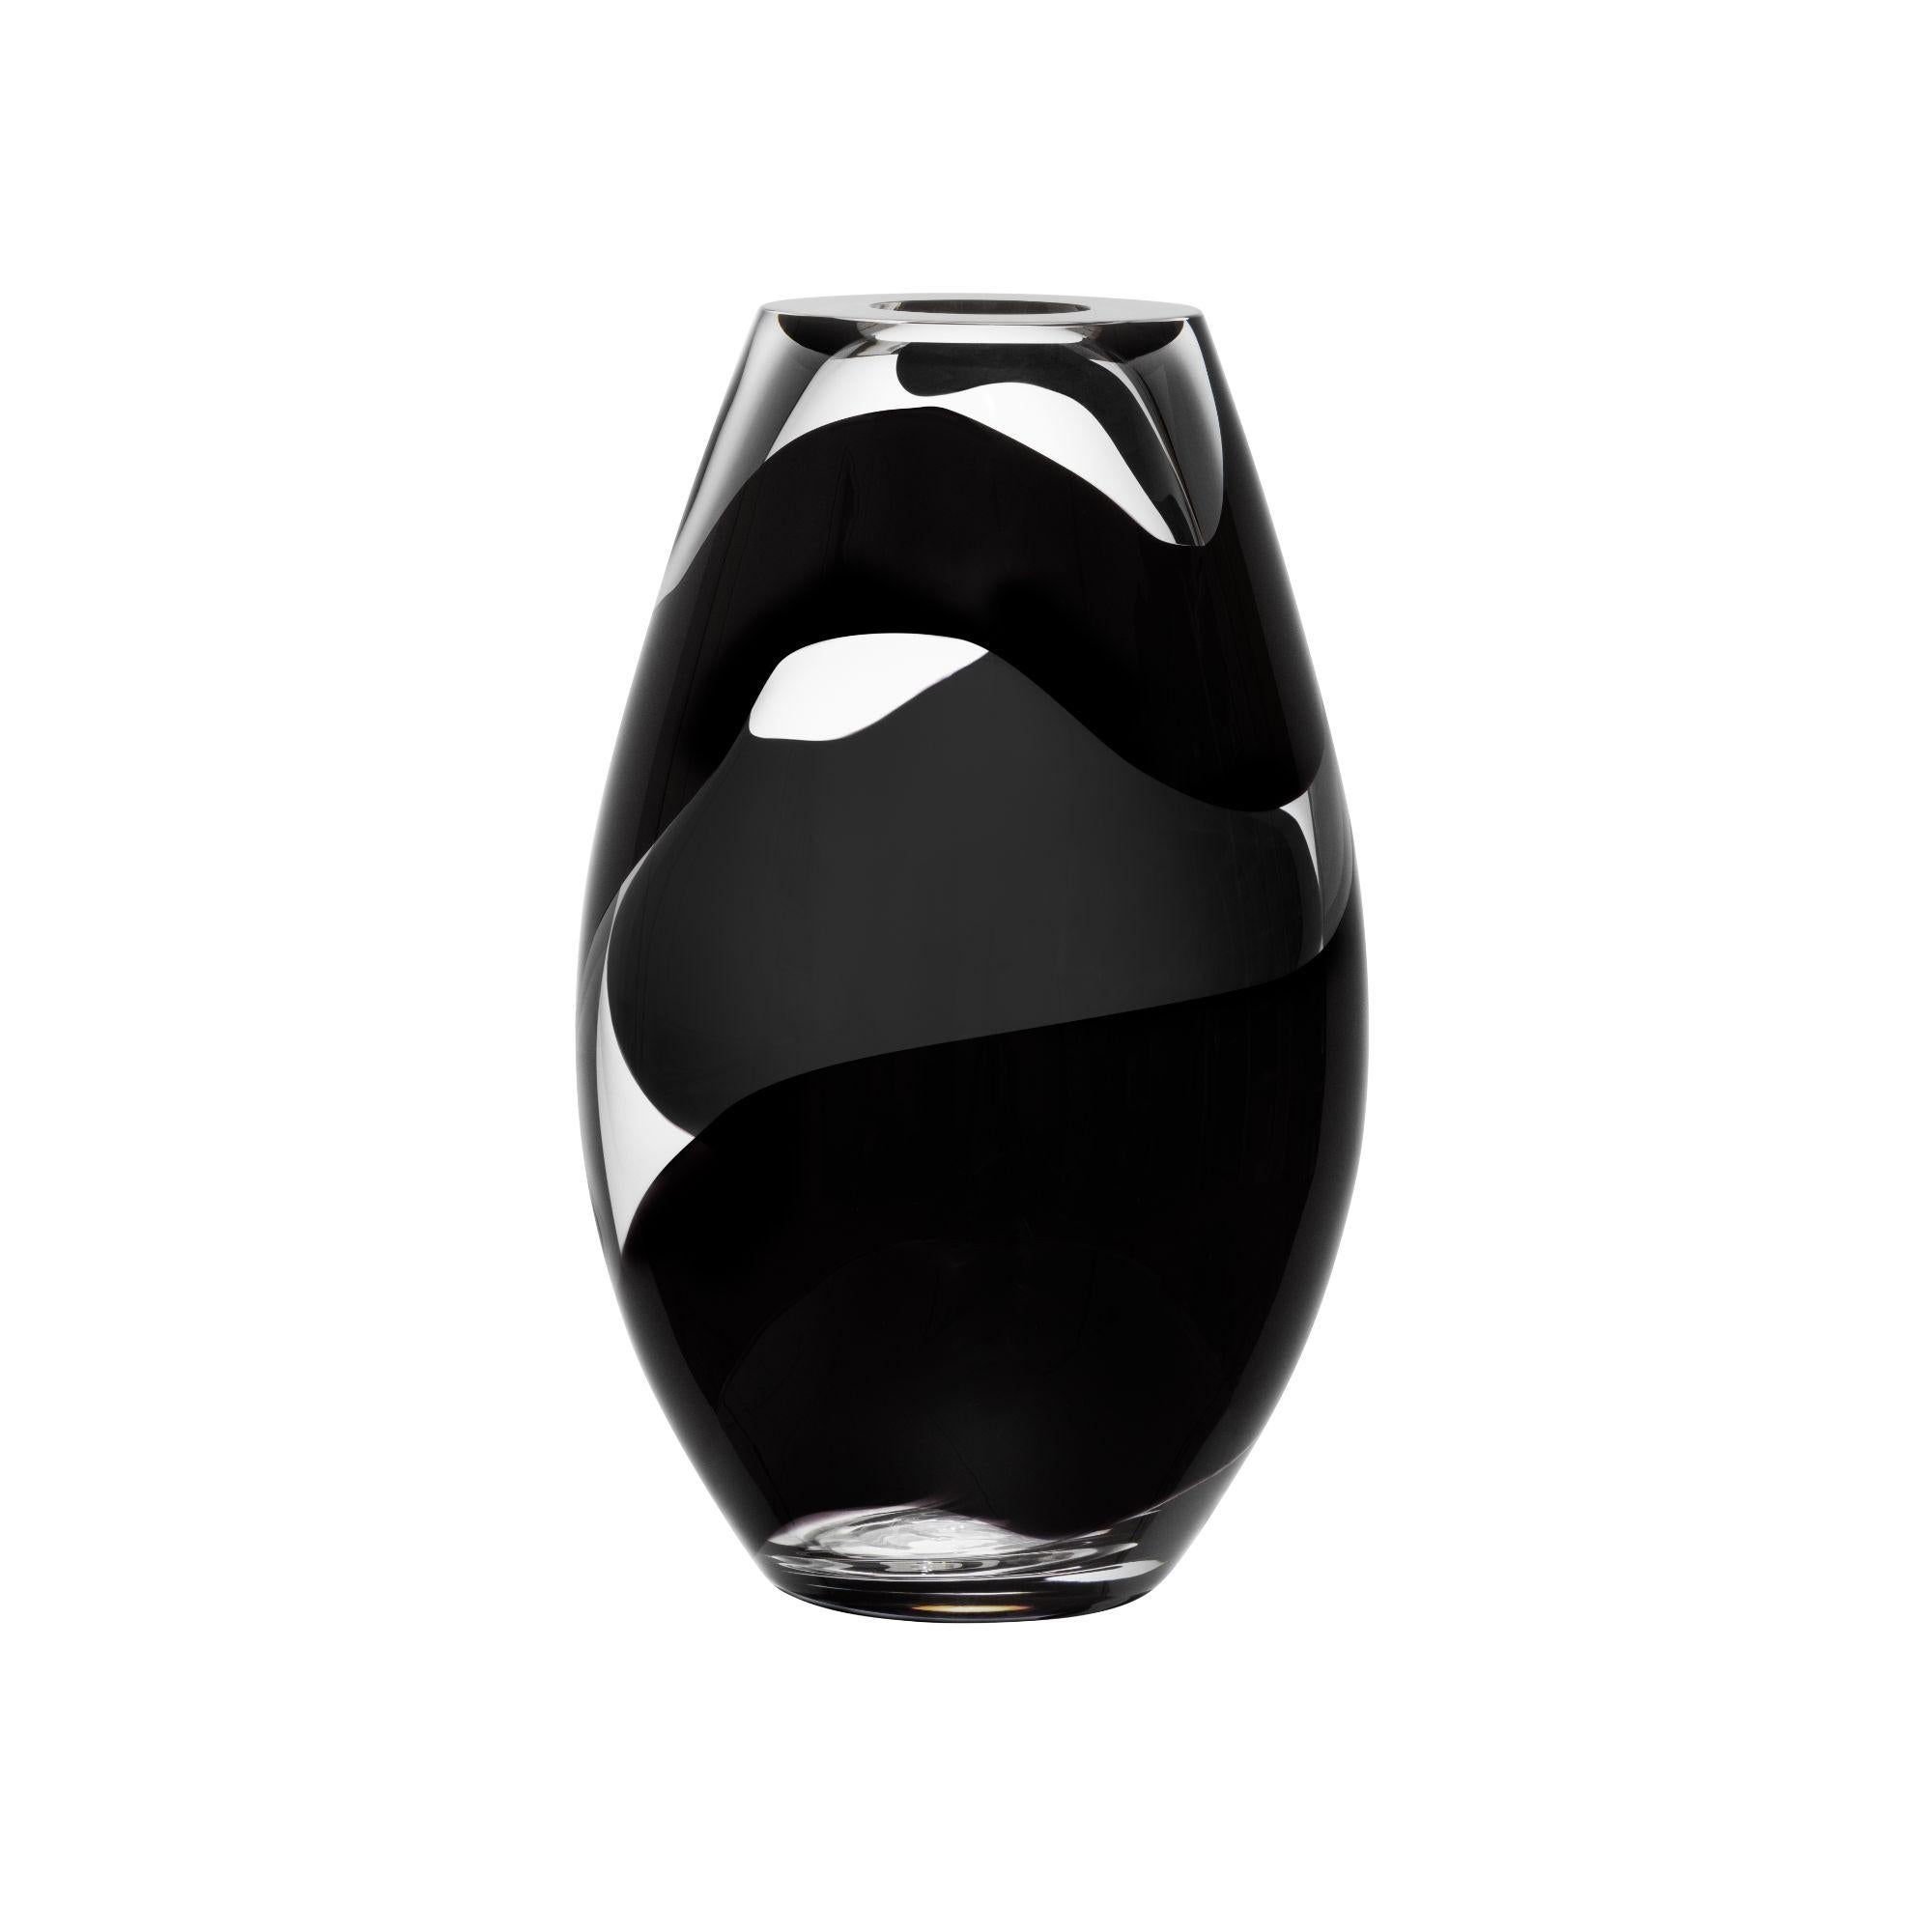 The Non Stop vase has a wrap-around black pattern that results in a graphic, vibrant finish. Let’s not ever stop loving great design. Either leave it be or fill it with your favorite flowers. The vase is mouth-blown at Kosta Glassworks in Sweden.